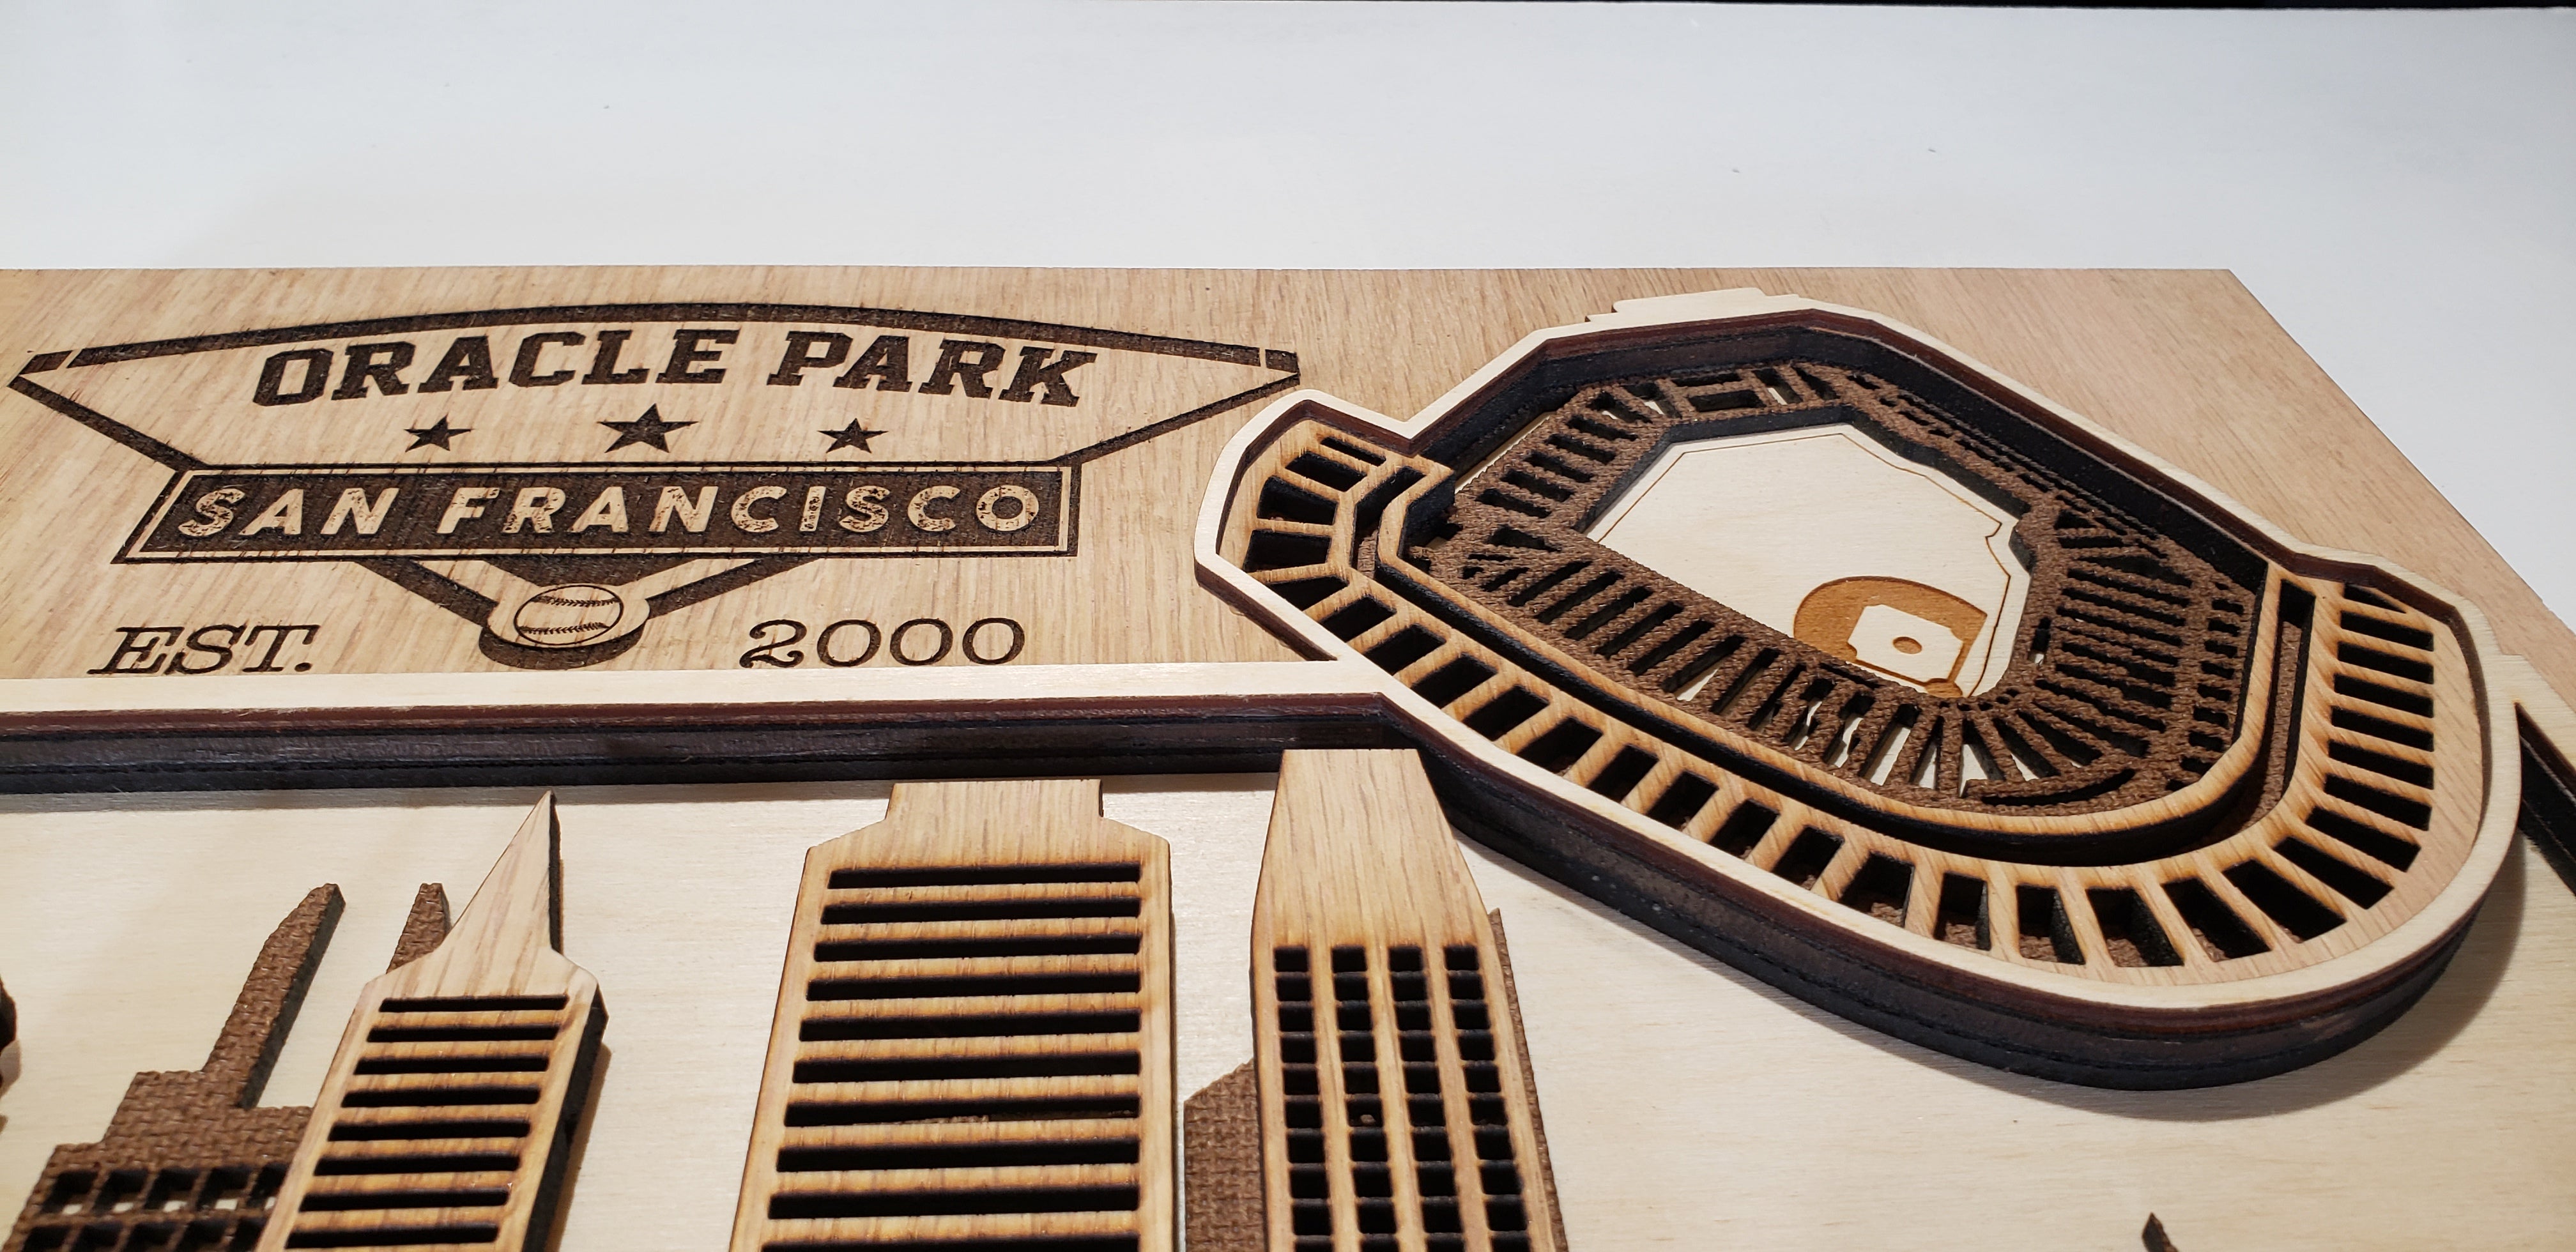 Oracle Park - Home of the San Francisco Giants